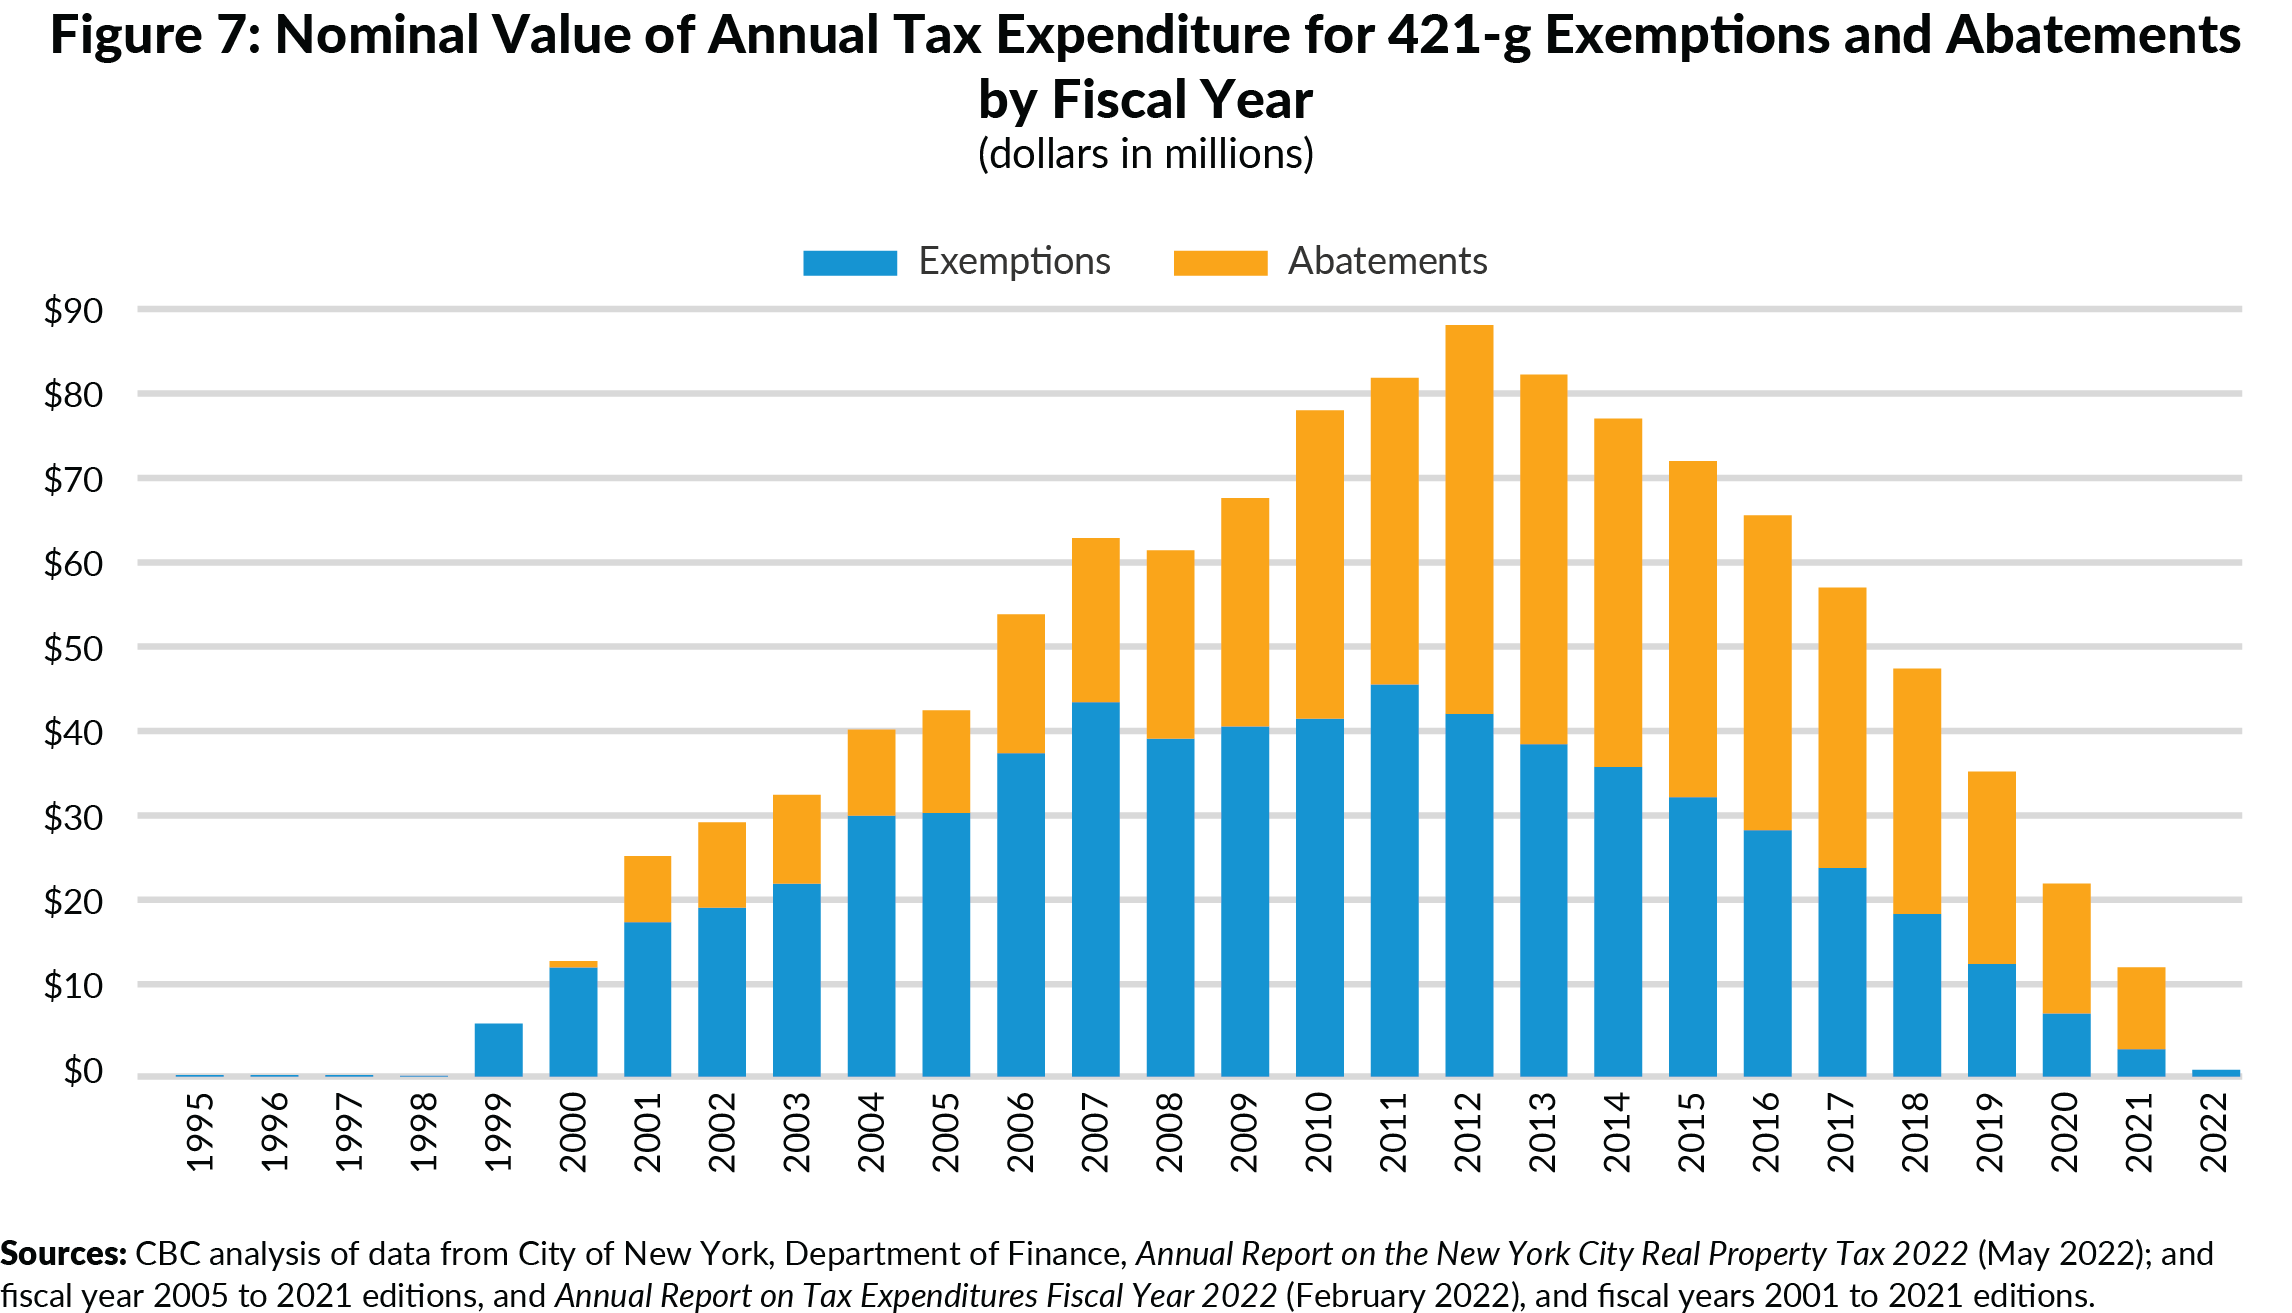 Figure 7. Nominal Value of Annual Tax Expenditure of 421-g Exemptions and Abatements by Fiscal Year, dollars in millions